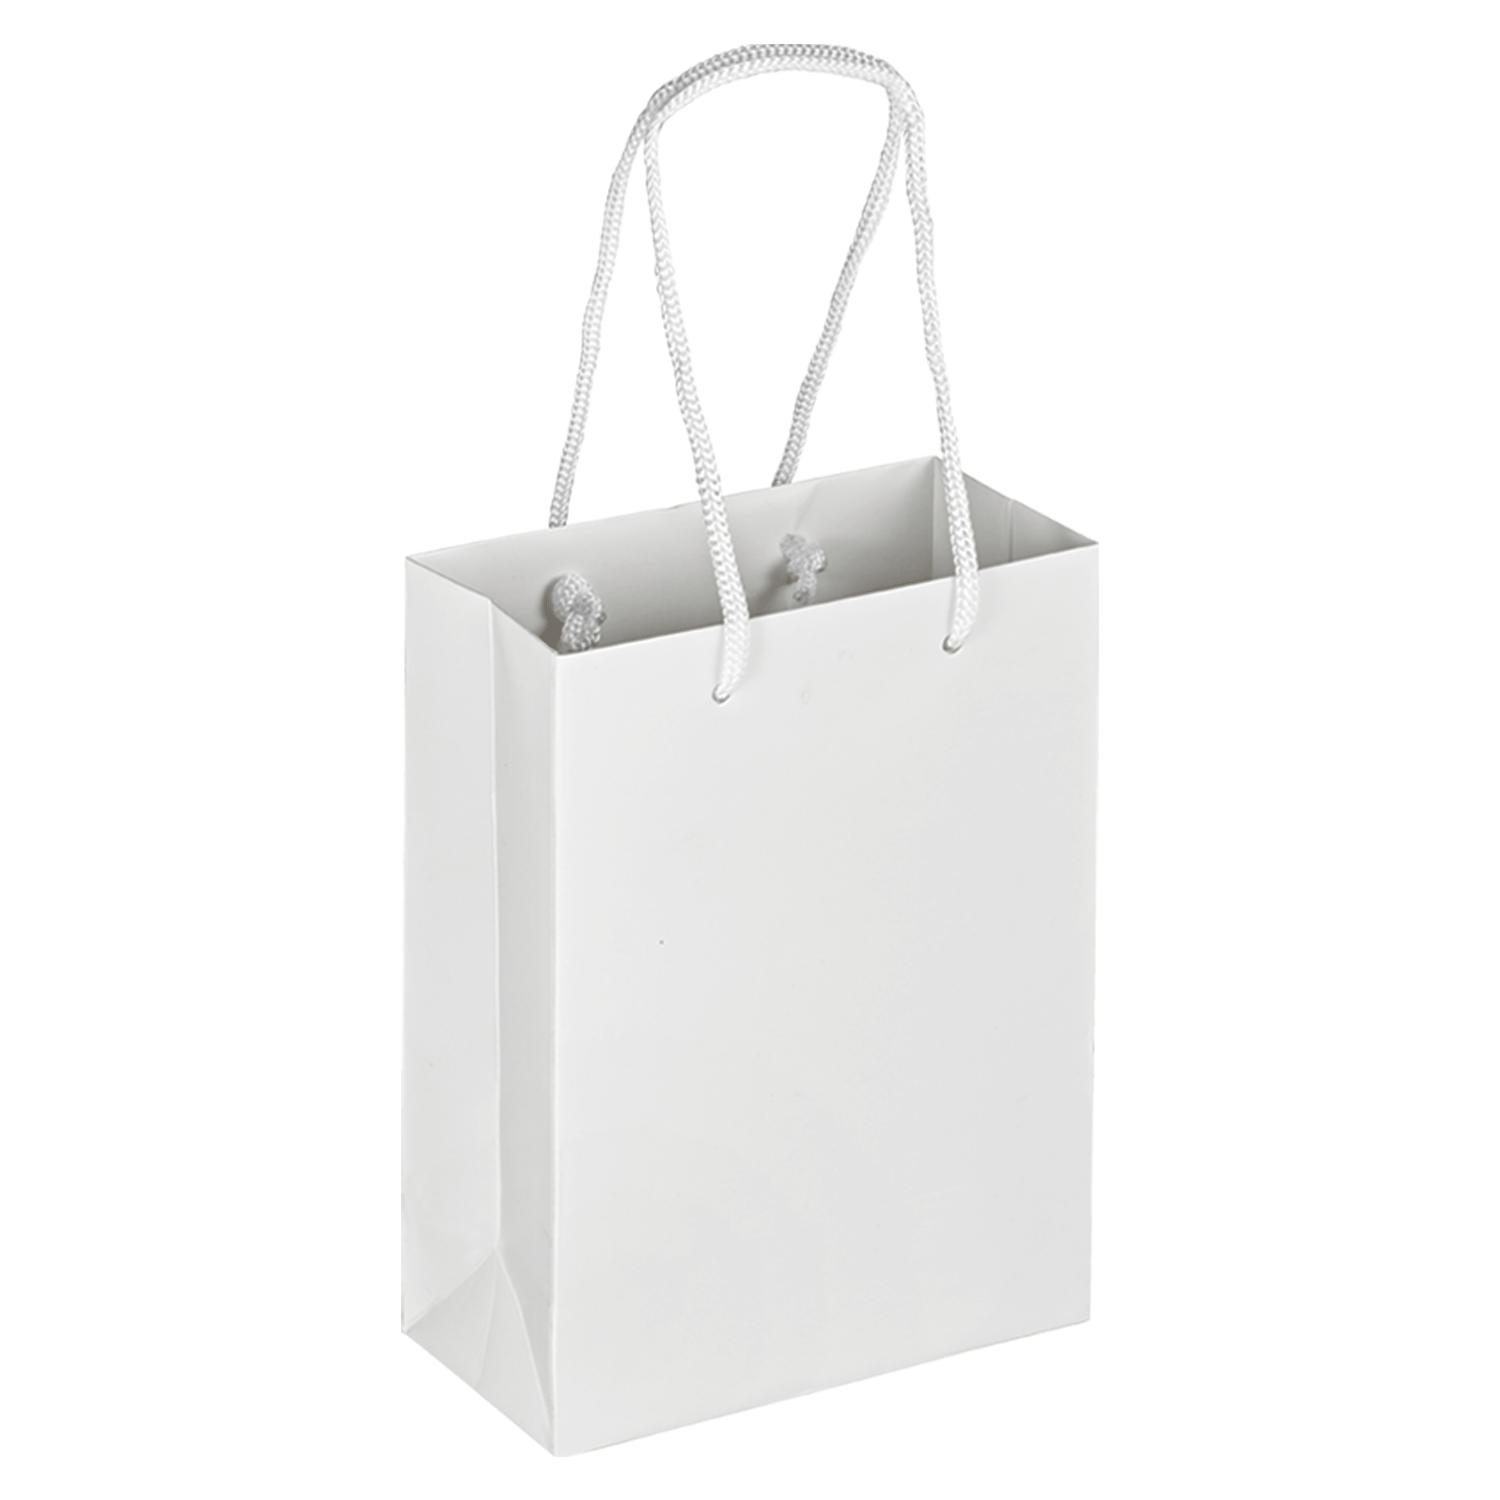 Boutique Shopping Bags White - Laminated (Small) [Min. Order Qty: 100 Bags]